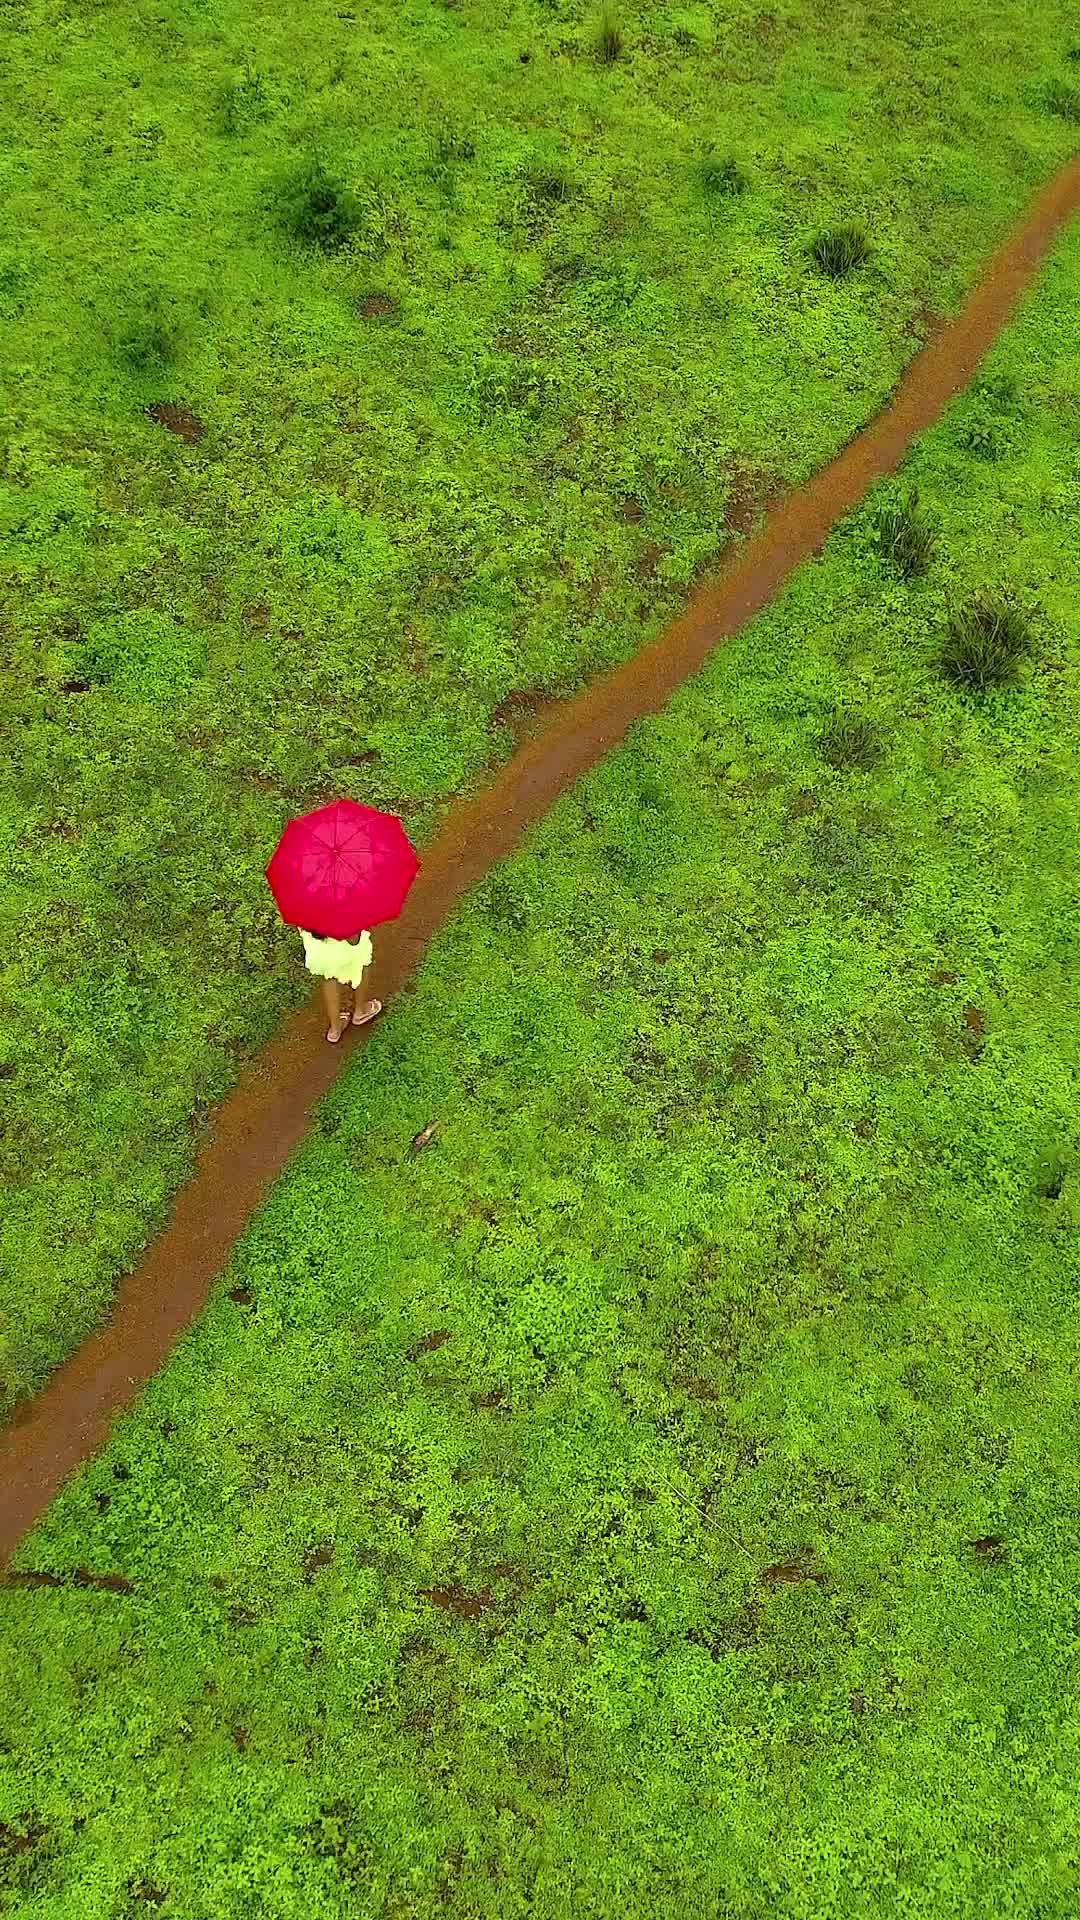 The Girl with Red Umbrella in Kerala's Lush Nature